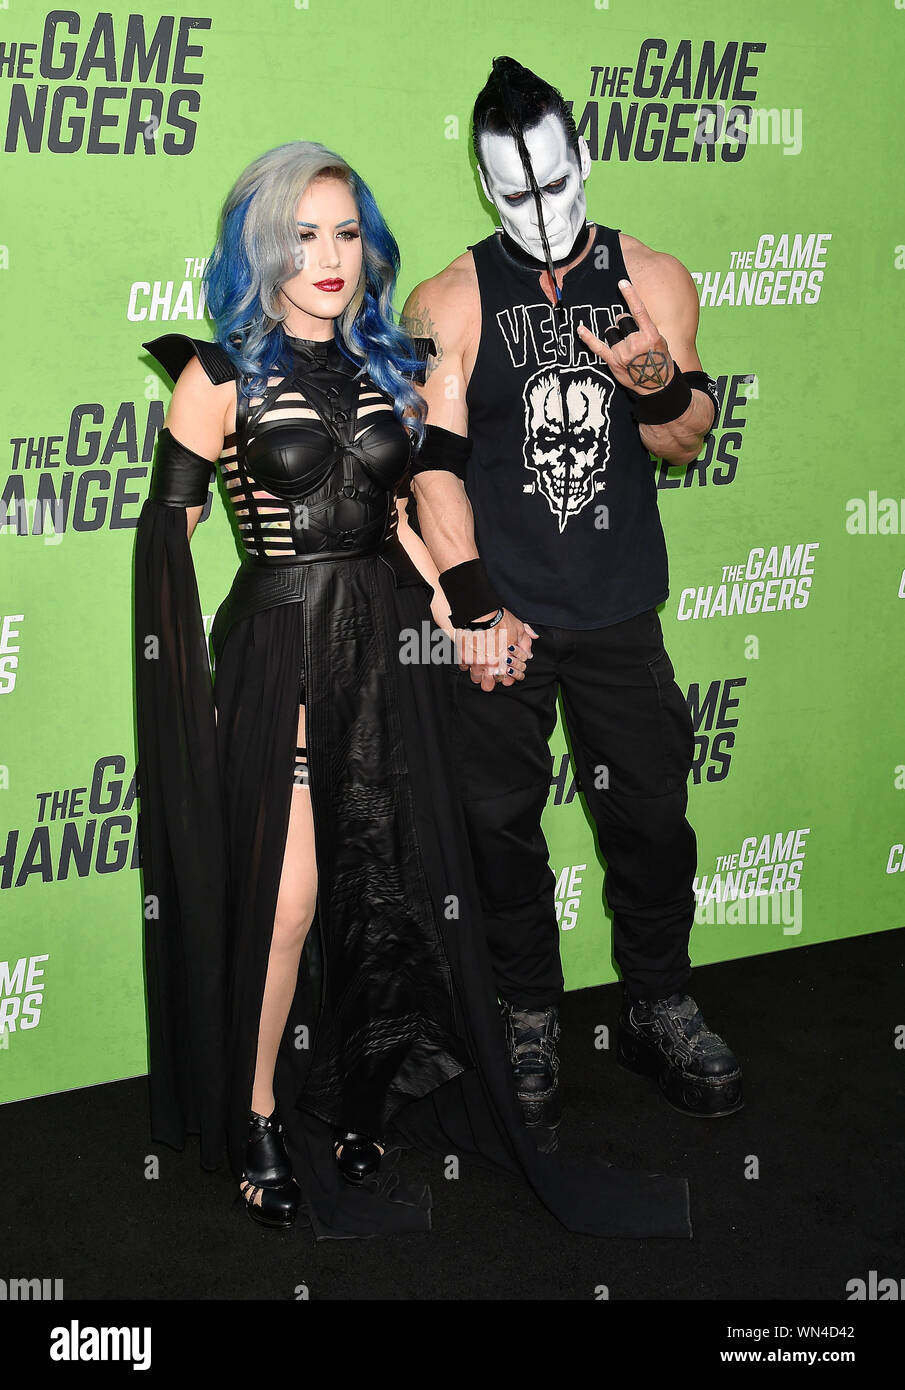 HOLLYWOOD, CA - SEPTEMBER 04: Alissa White-Gluz (L) and Doyle Wolfgang von Frankenstein attend the LA Premiere Of "The Game Changers" at ArcLight Hollywood on September 04, 2019 in Hollywood, California. Stock Photo